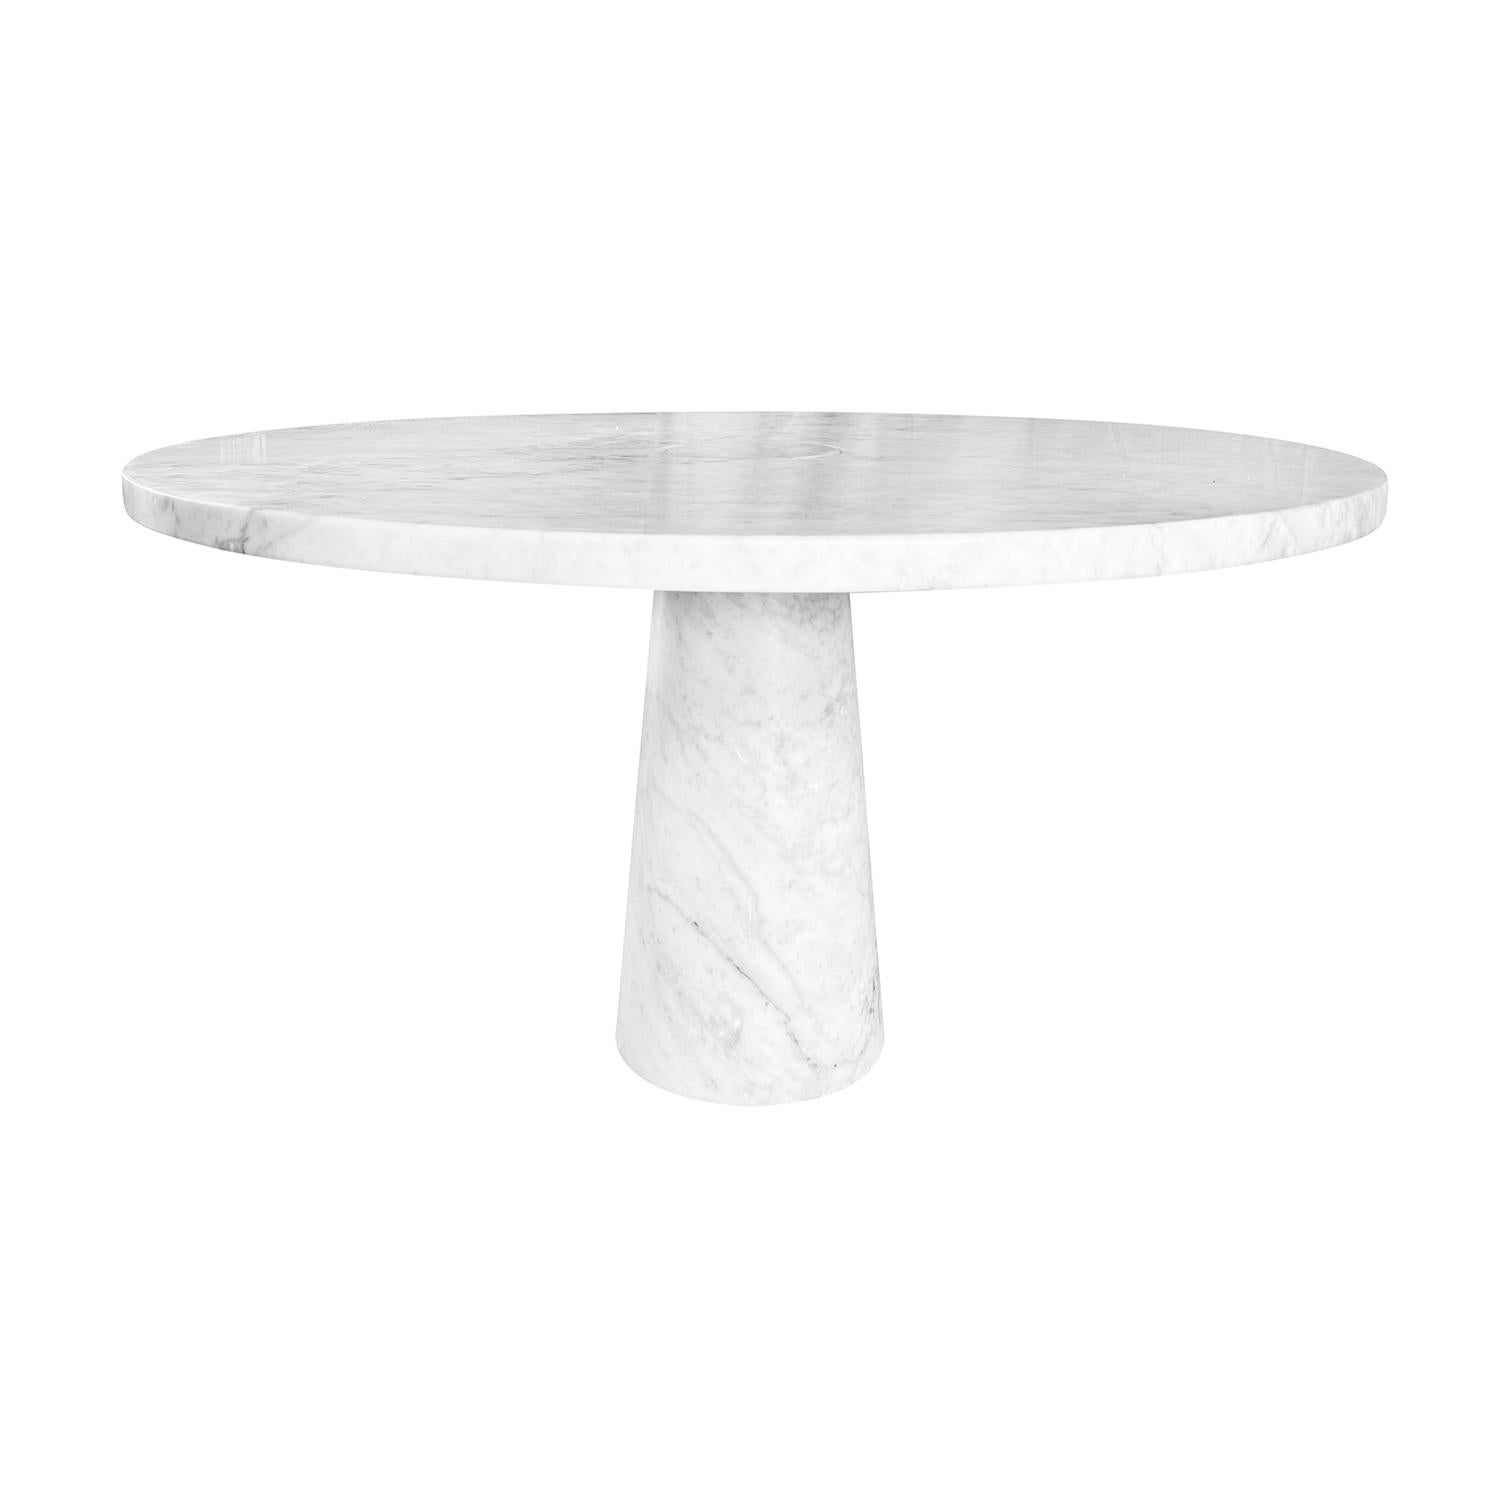 A vintage Mid-Century modern Italian dining room table made of hand crafted white Carrara marble Arabescato, designed by Angelo Mangiarotti and produced by Skipper in good condition. The large round top of the Eros series table has no joints or